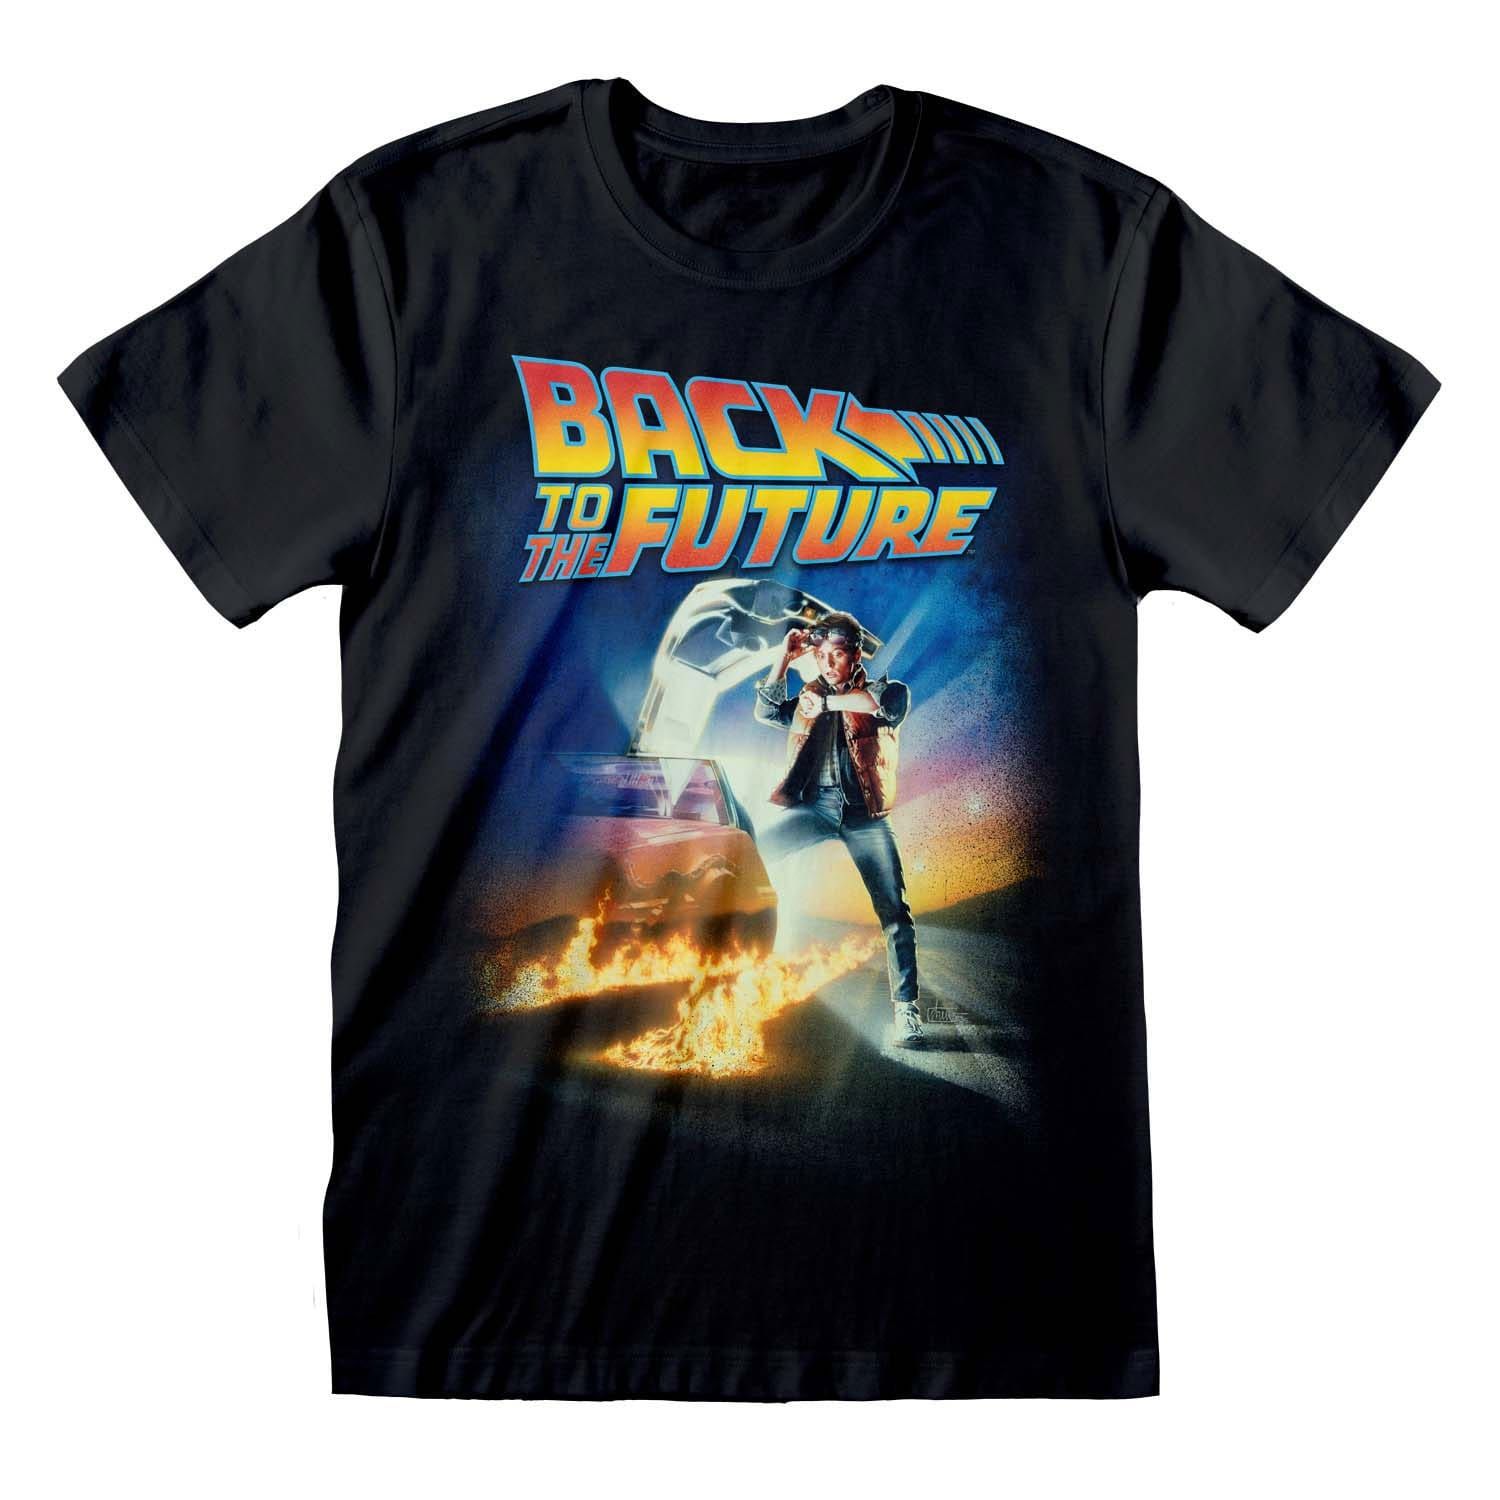 Back to the Future T-Shirt Poster Size L Heroes Inc